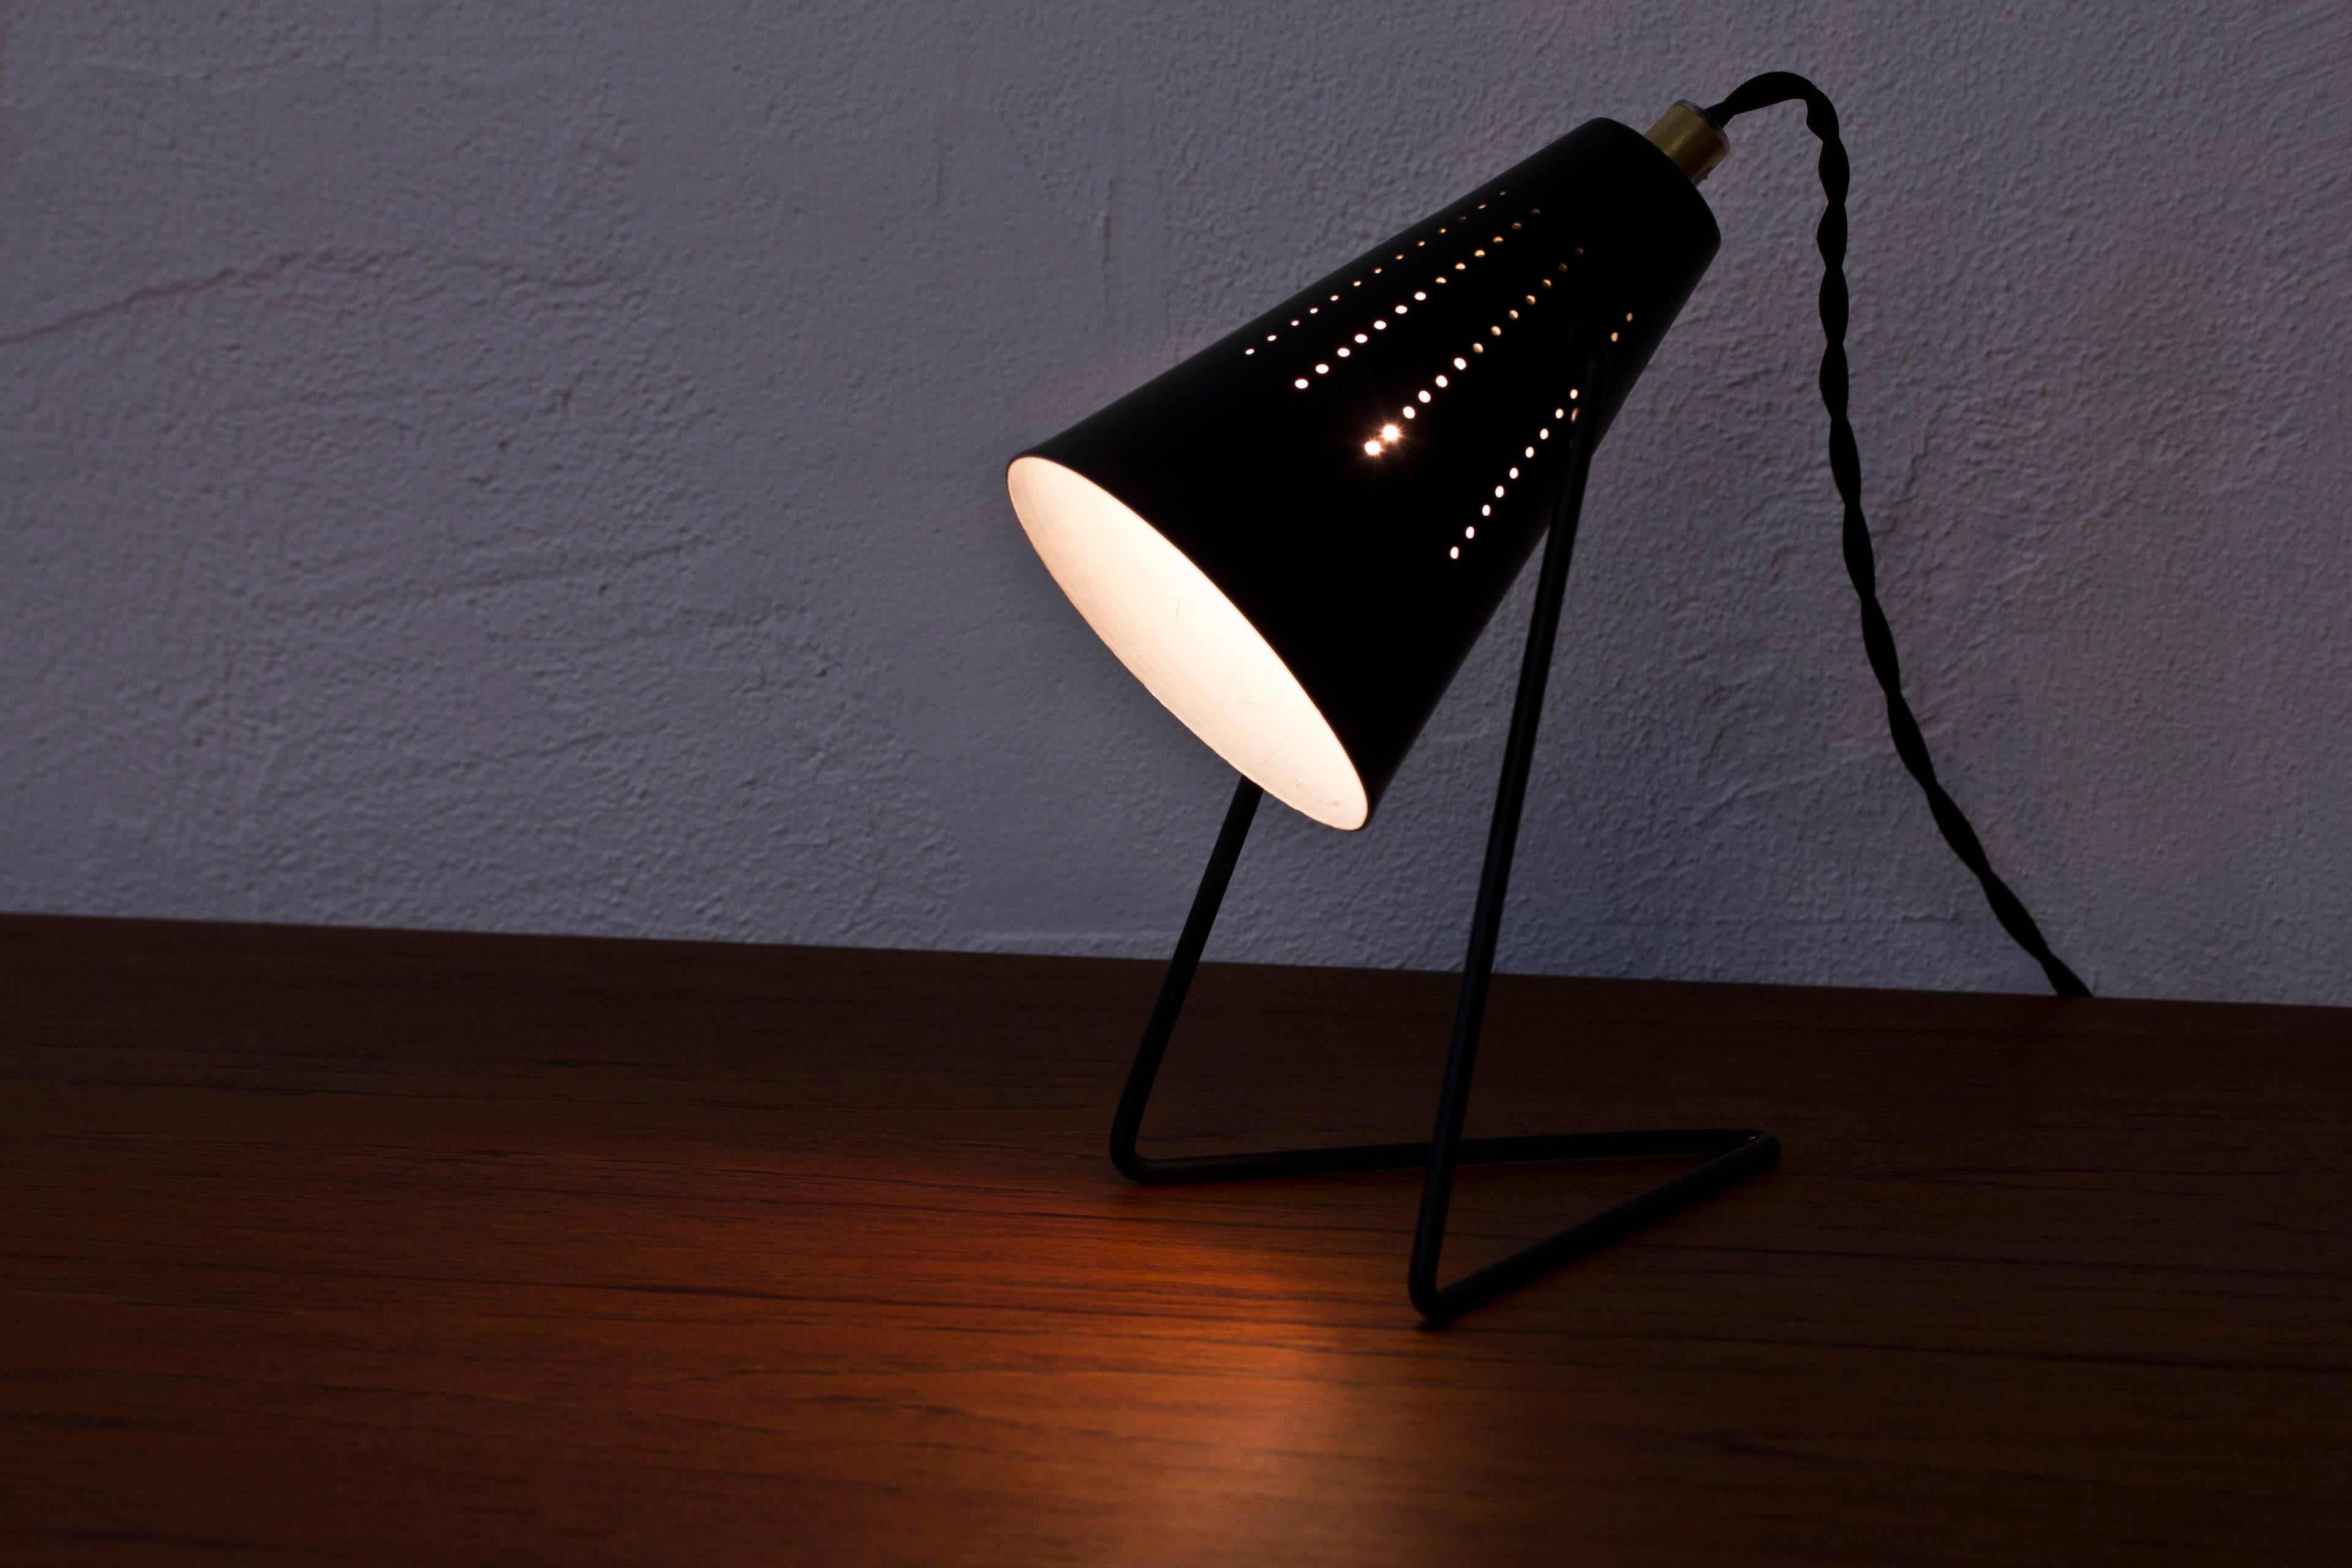 Mid-20th Century Wall or Table Lamp Attributed to Svend Aage Holm Sørensen